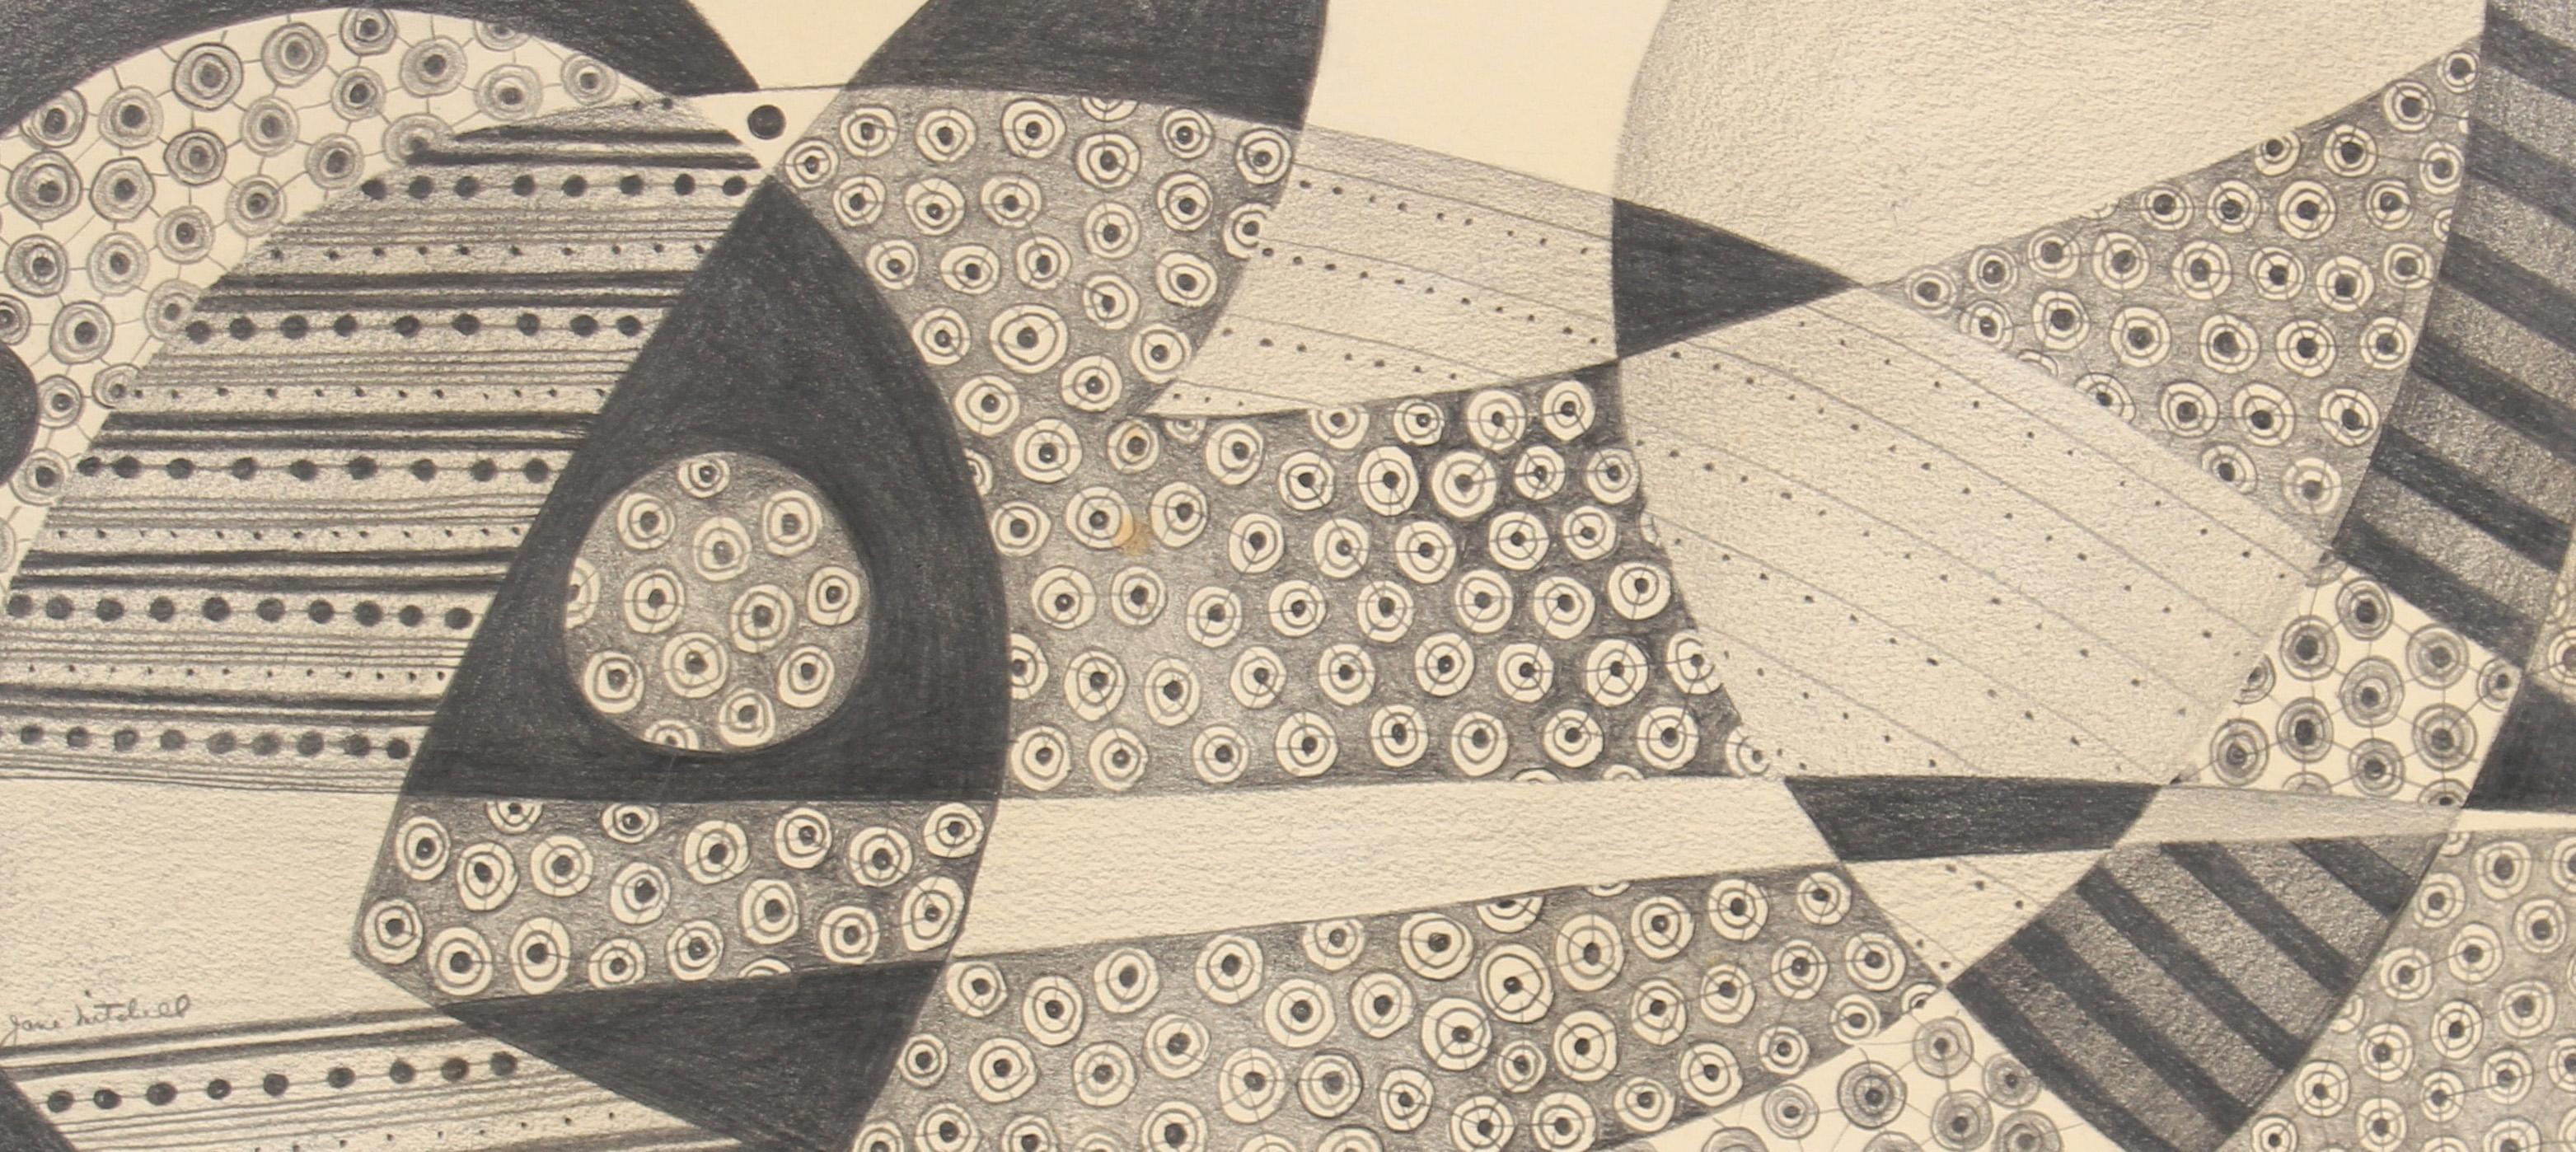 Detailed Surrealist Abstract in Graphite, 1970s - Art by Jane Mitchell